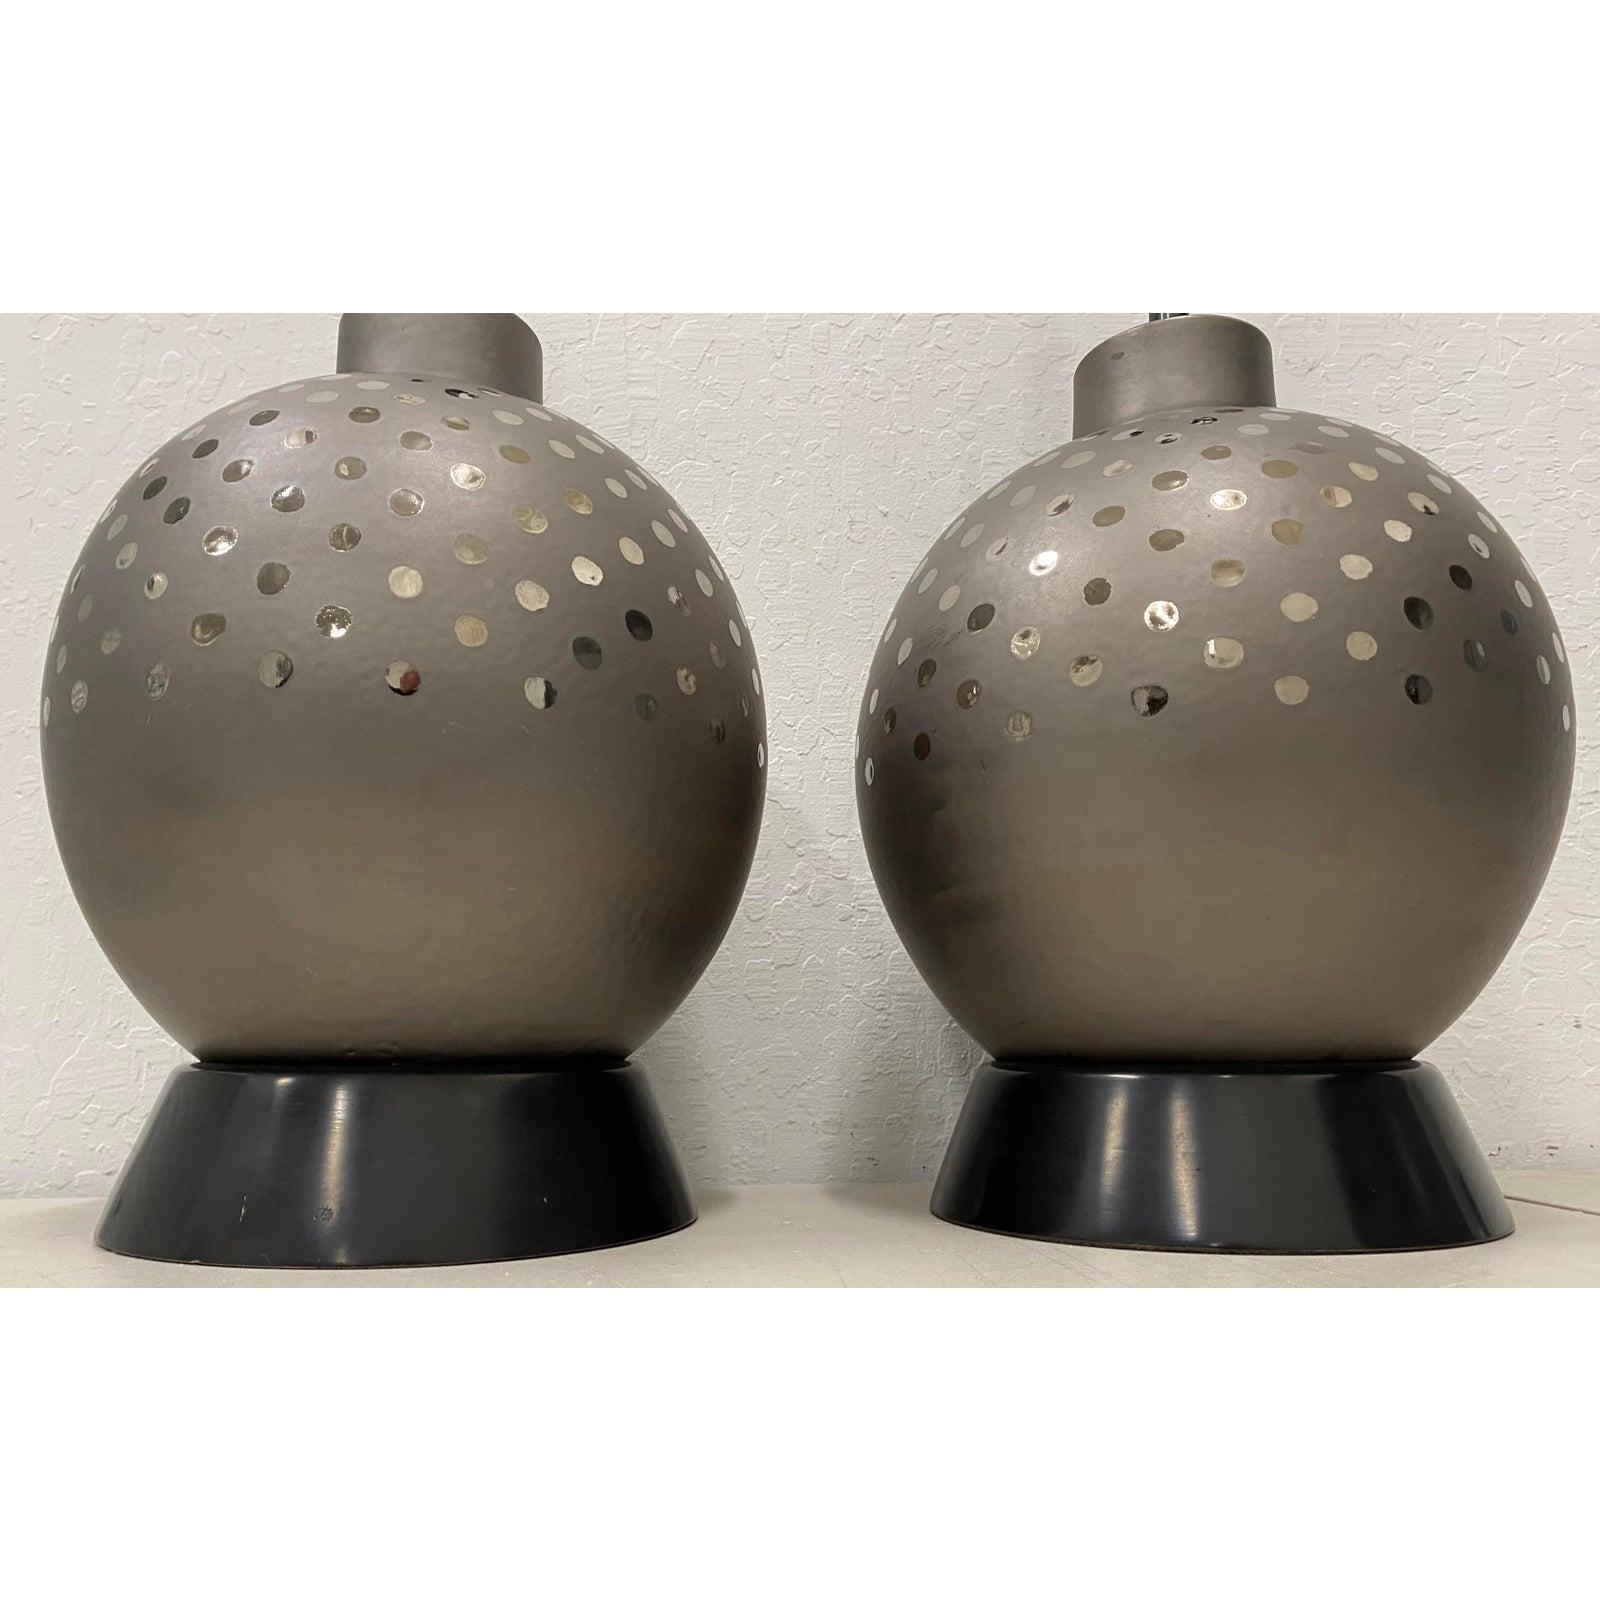 American Pair of Vintage Ceramic Metallic Silver Glaze Ball Lamps by Marbro, circa 1970 For Sale